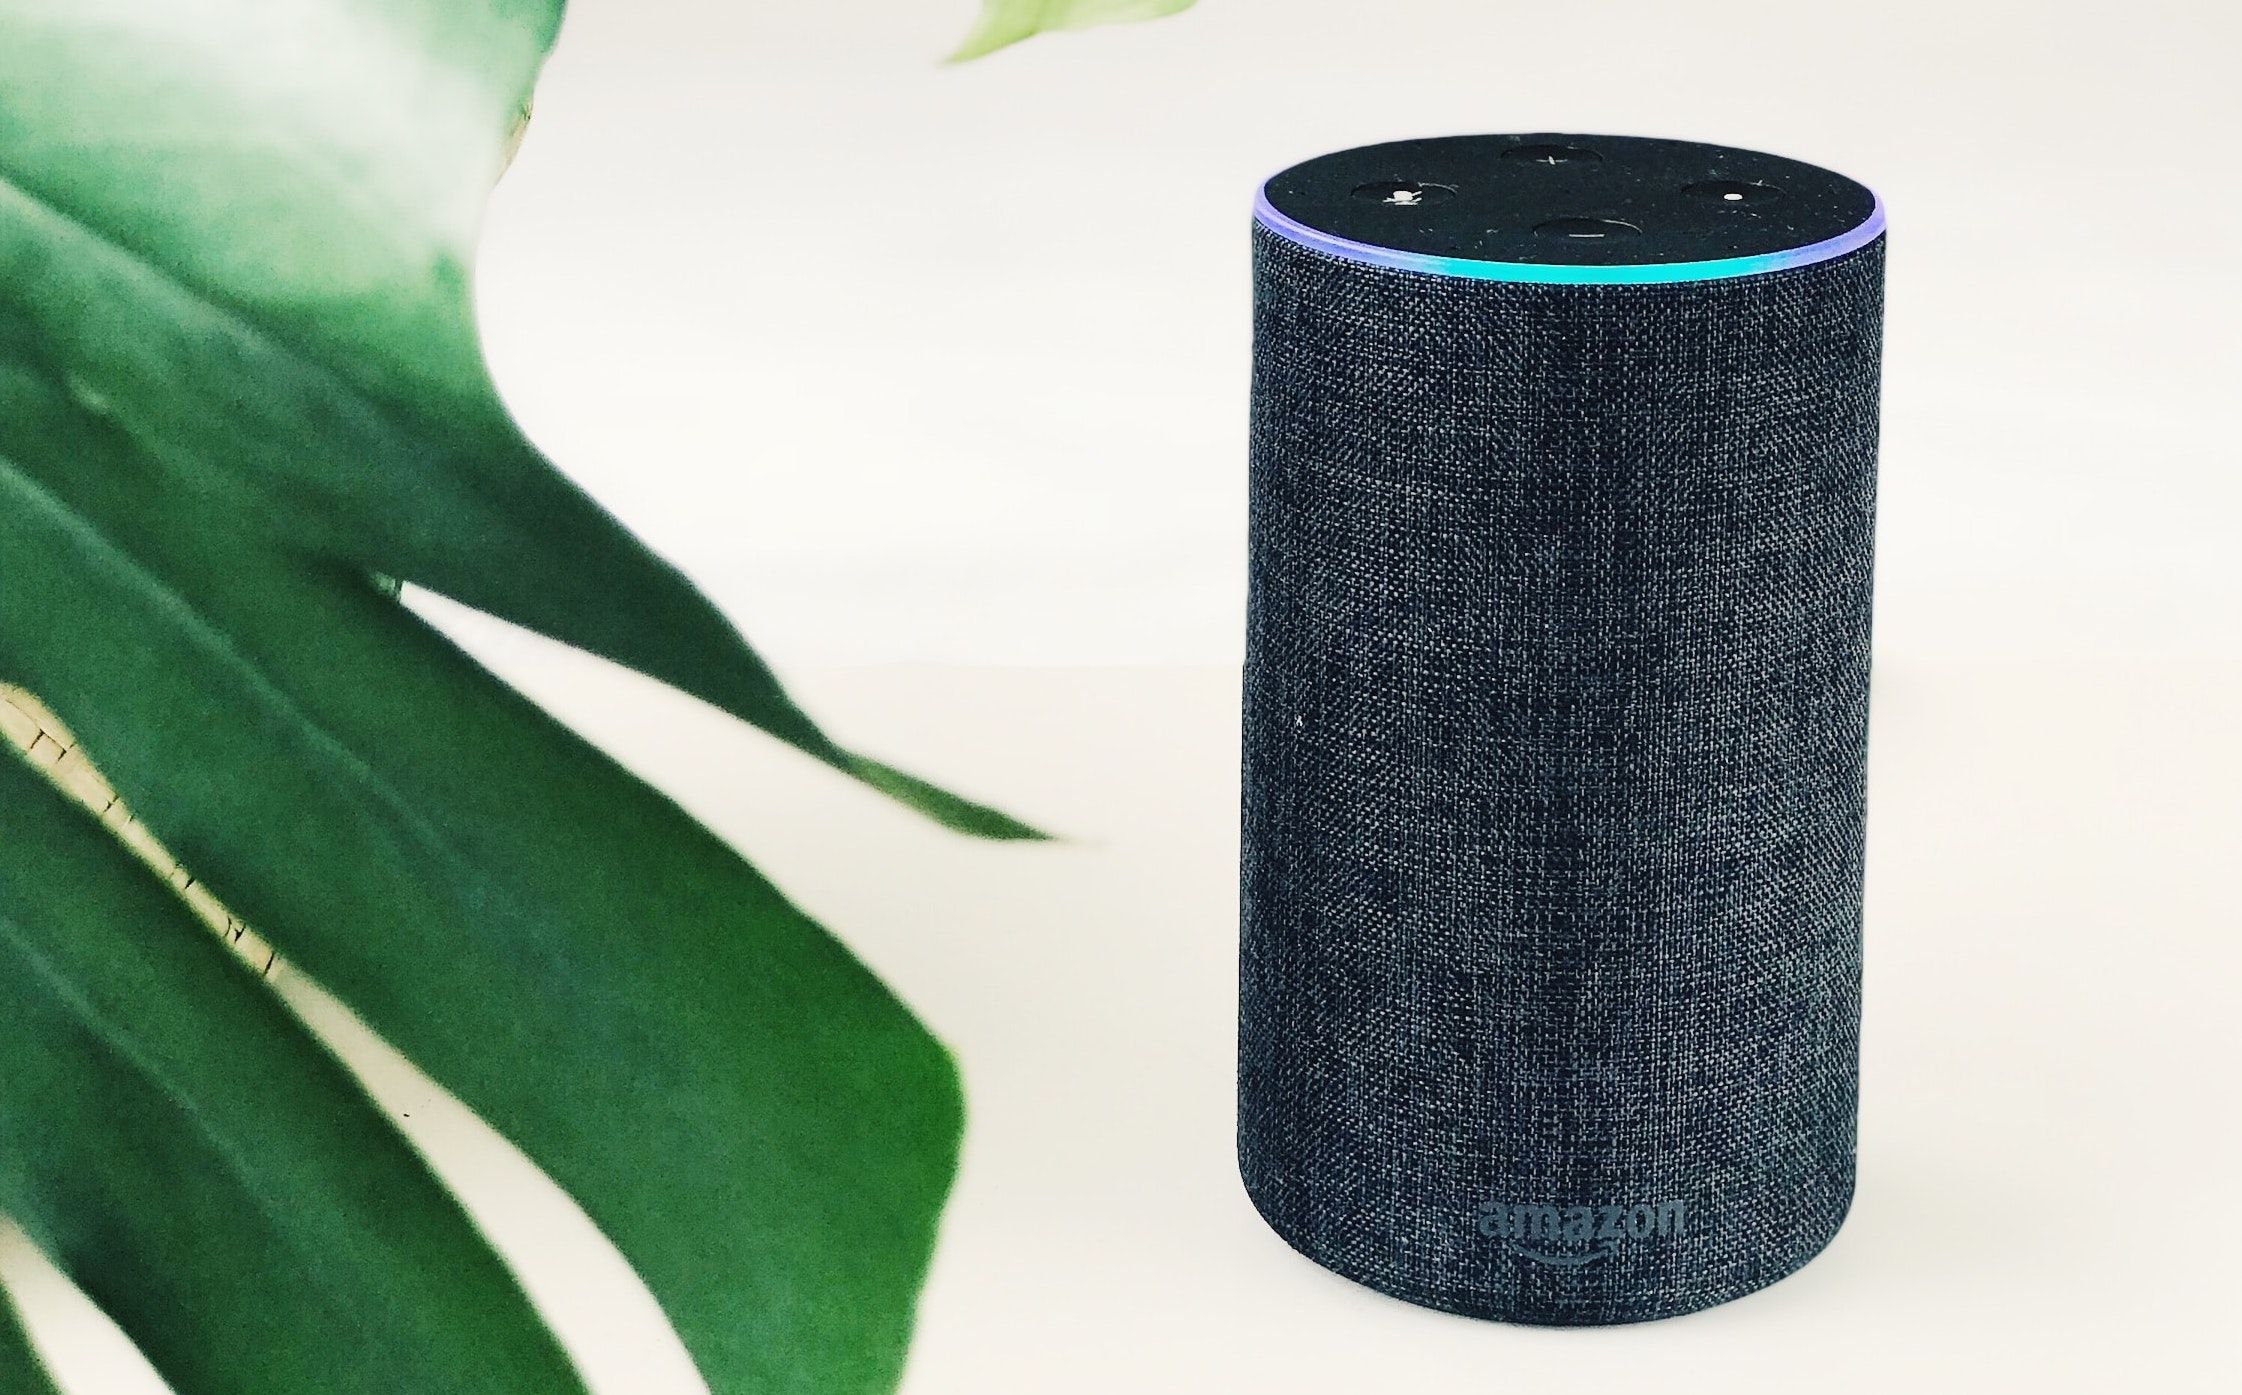 Alexa, hack yourself - researchers describe new exploit that turns smart  speakers against themselves